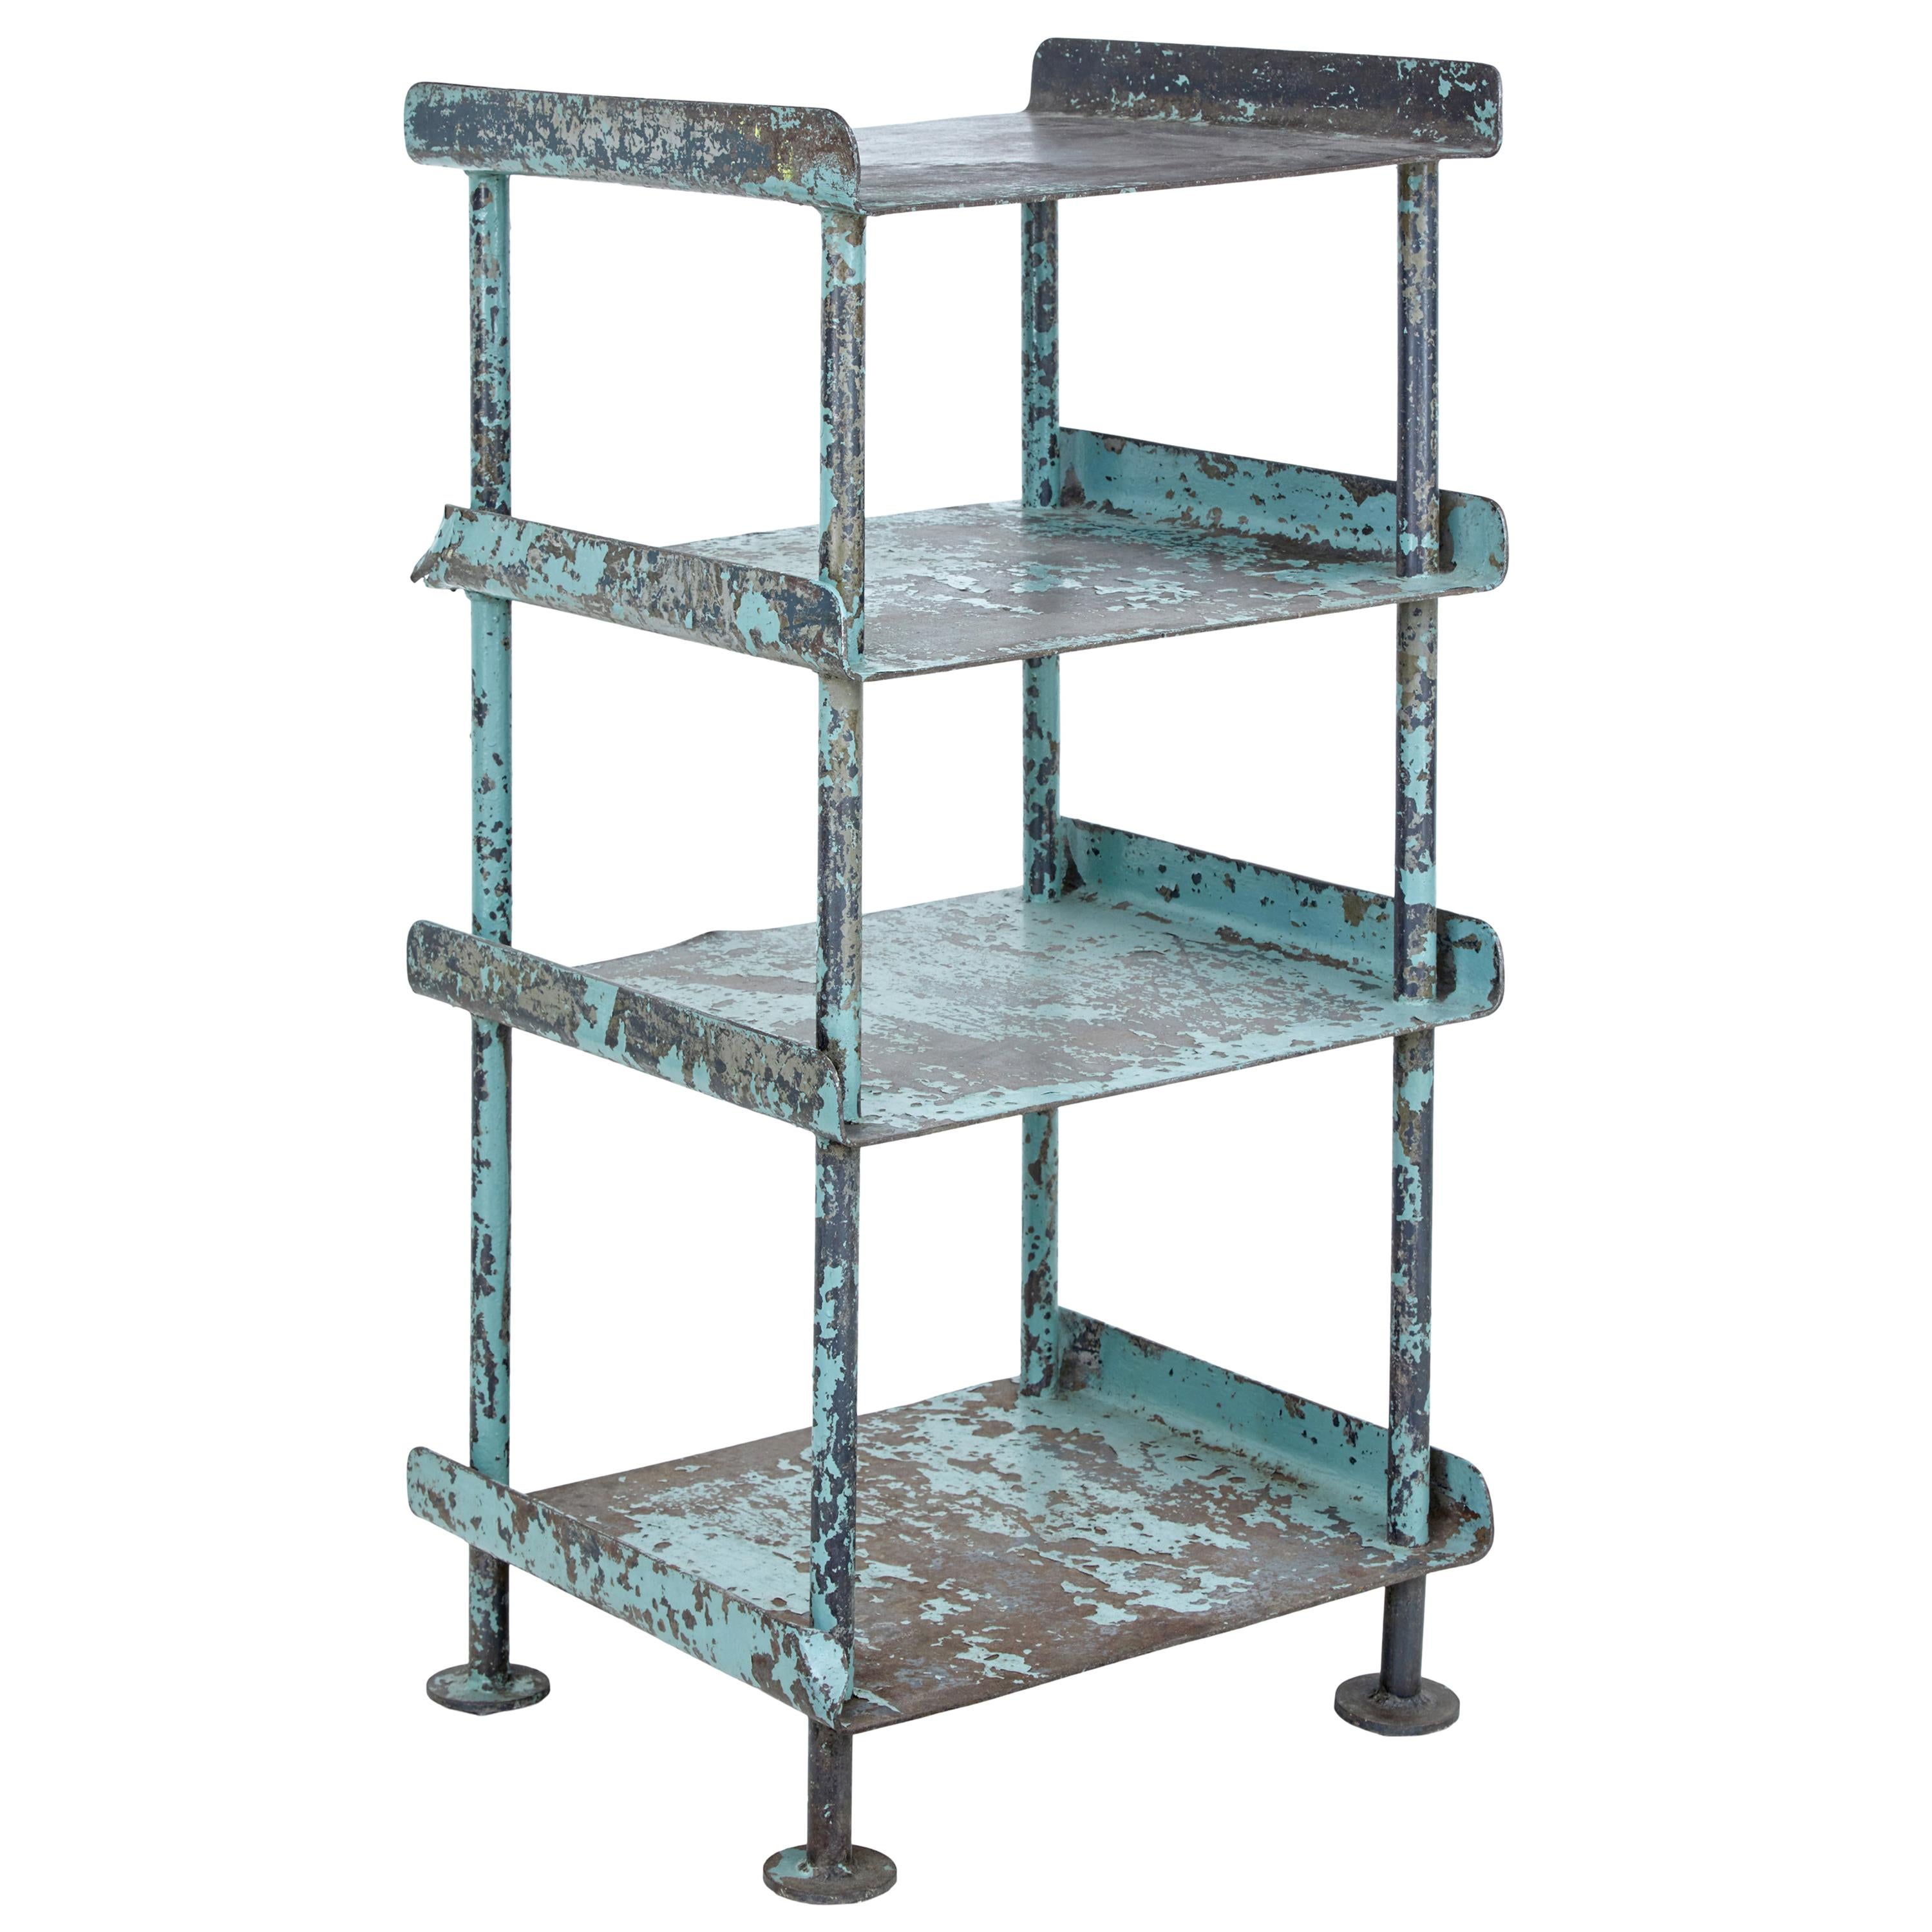 1920's Industrial Painted Shelving Unit